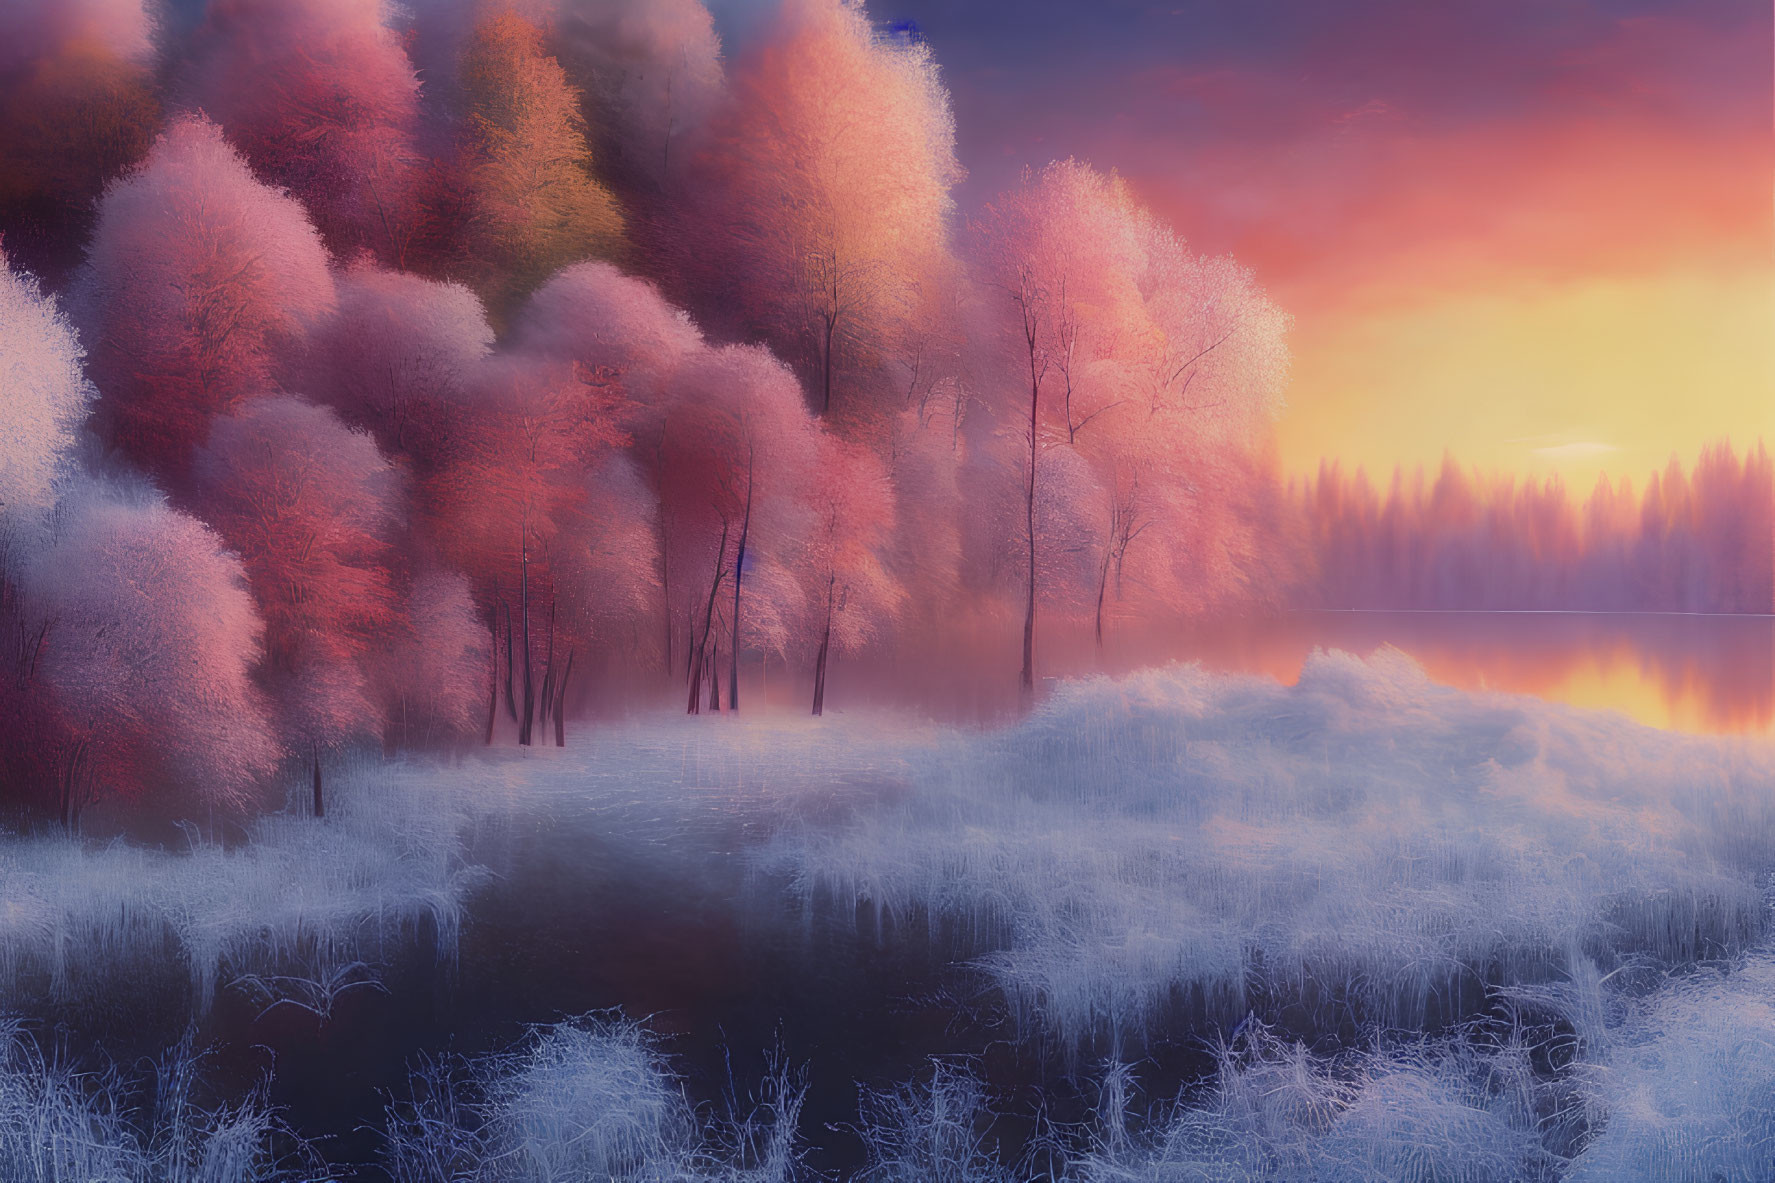 Colorful Autumn Forest with Frosted Ground and Reflective Lake at Sunrise or Sunset